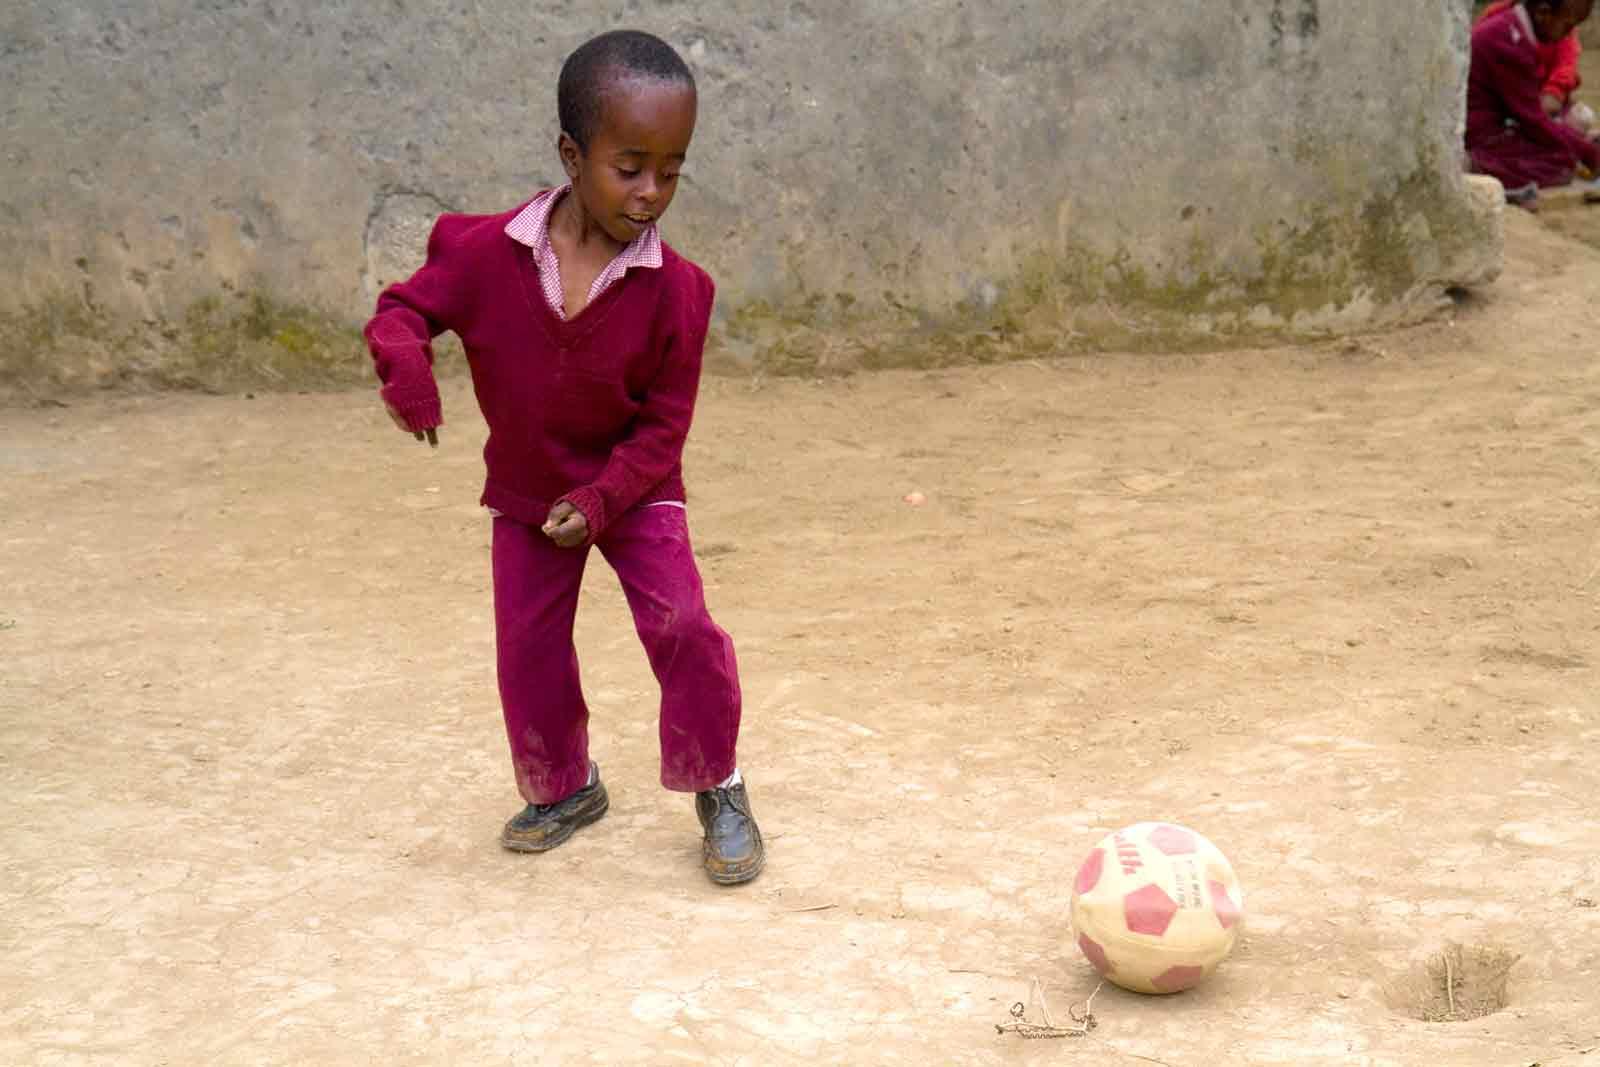 Boy with disabilities plays football